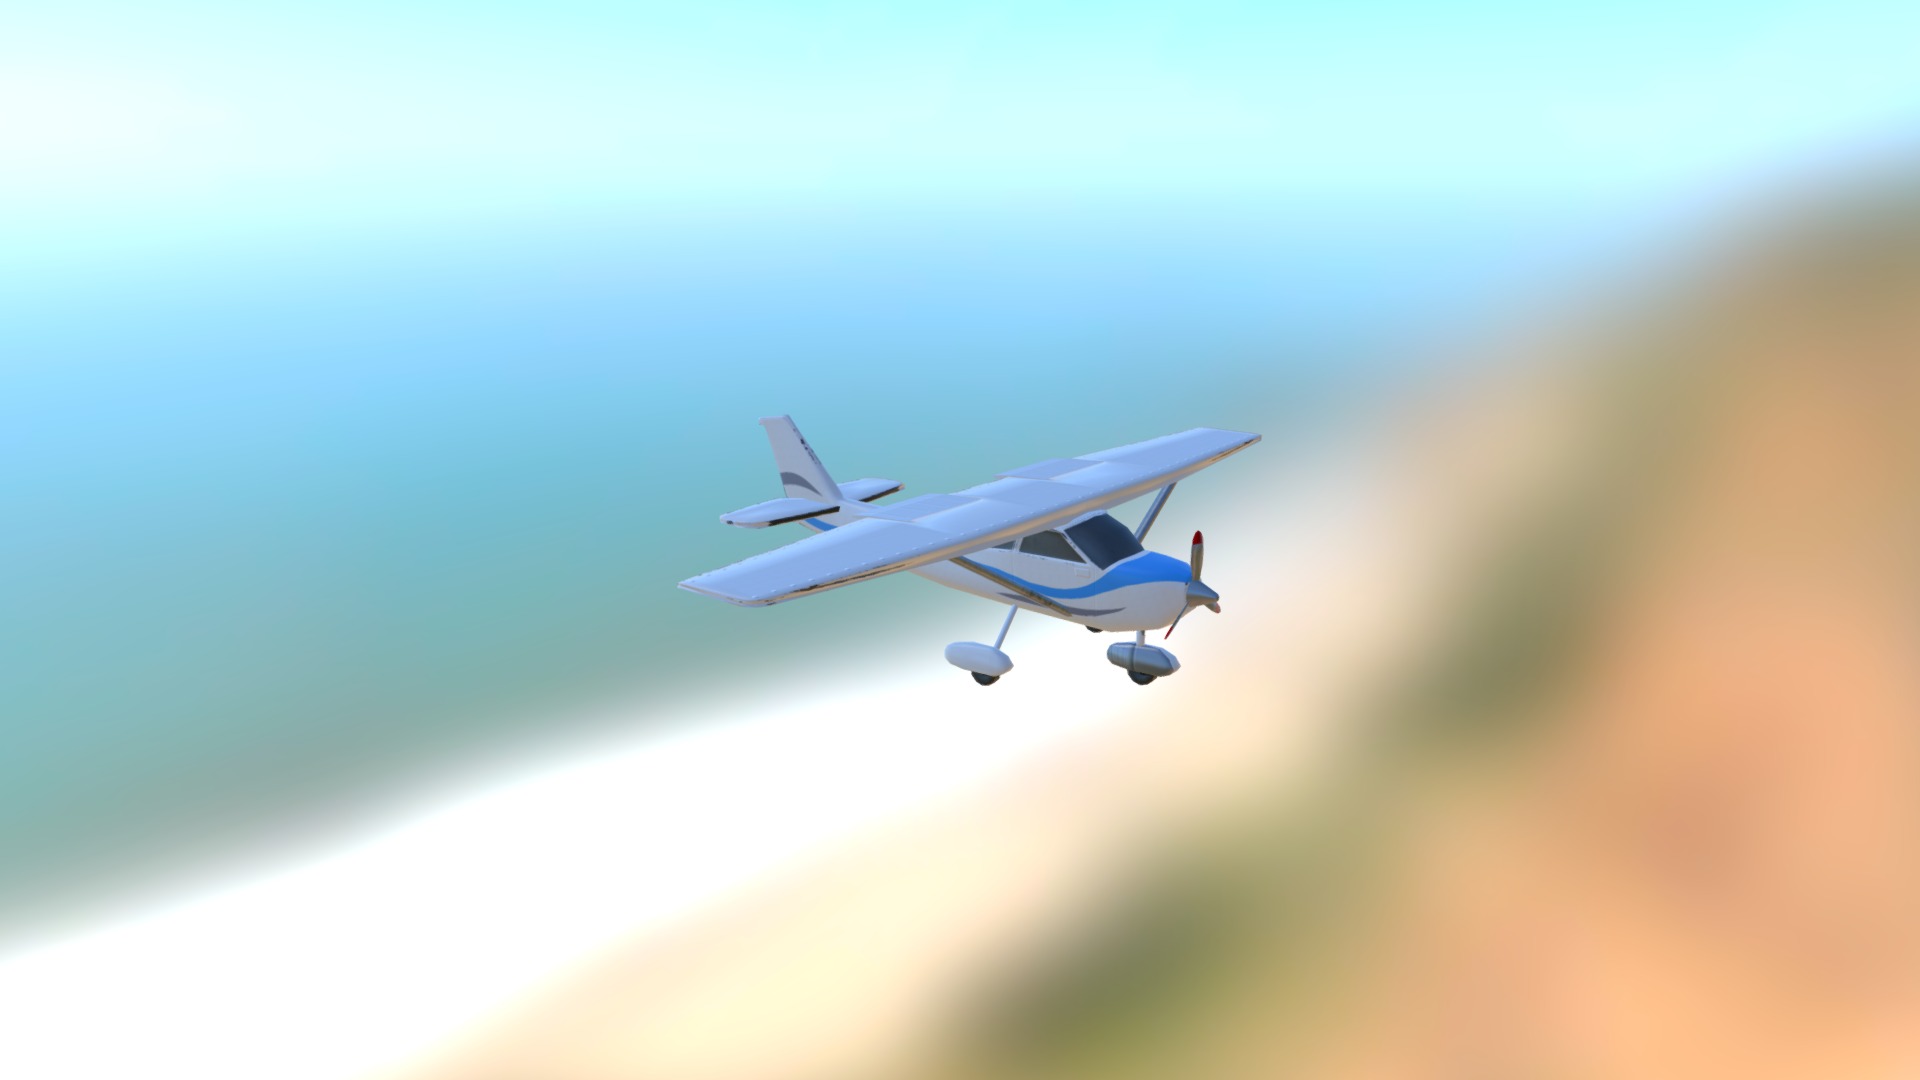 3D model Small Passenger Plane - This is a 3D model of the Small Passenger Plane. The 3D model is about a plane flying in the sky.